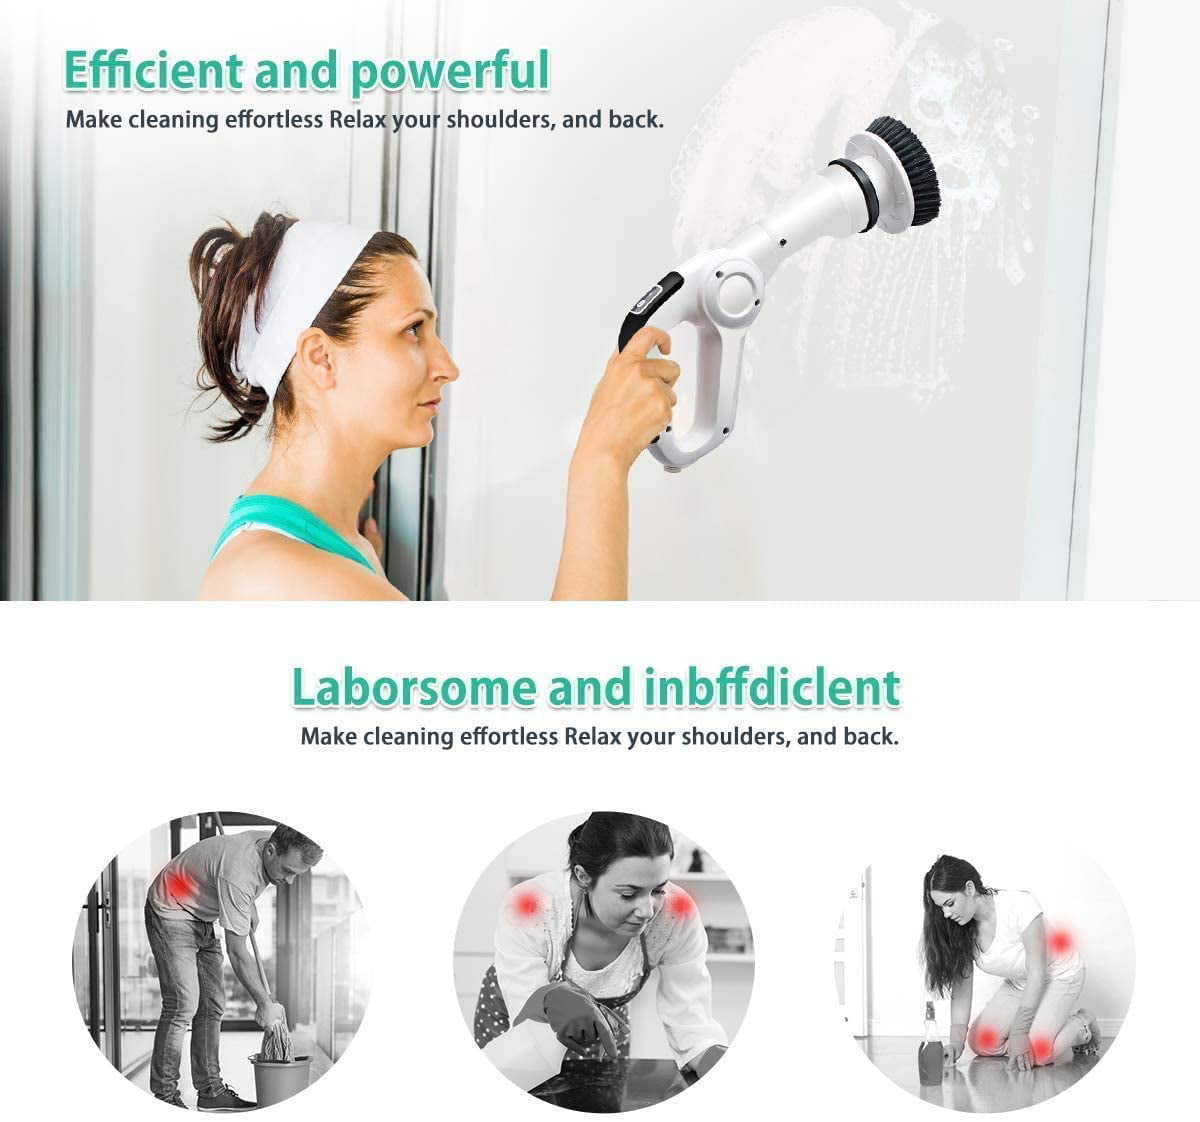 Boomjoy Electric Spin Scrubber Power Cordless and Handheld Bathroom Scrubber  with 3 Replaceable Cleaning Brush Heads - China Bathroom Brush and Brush  price